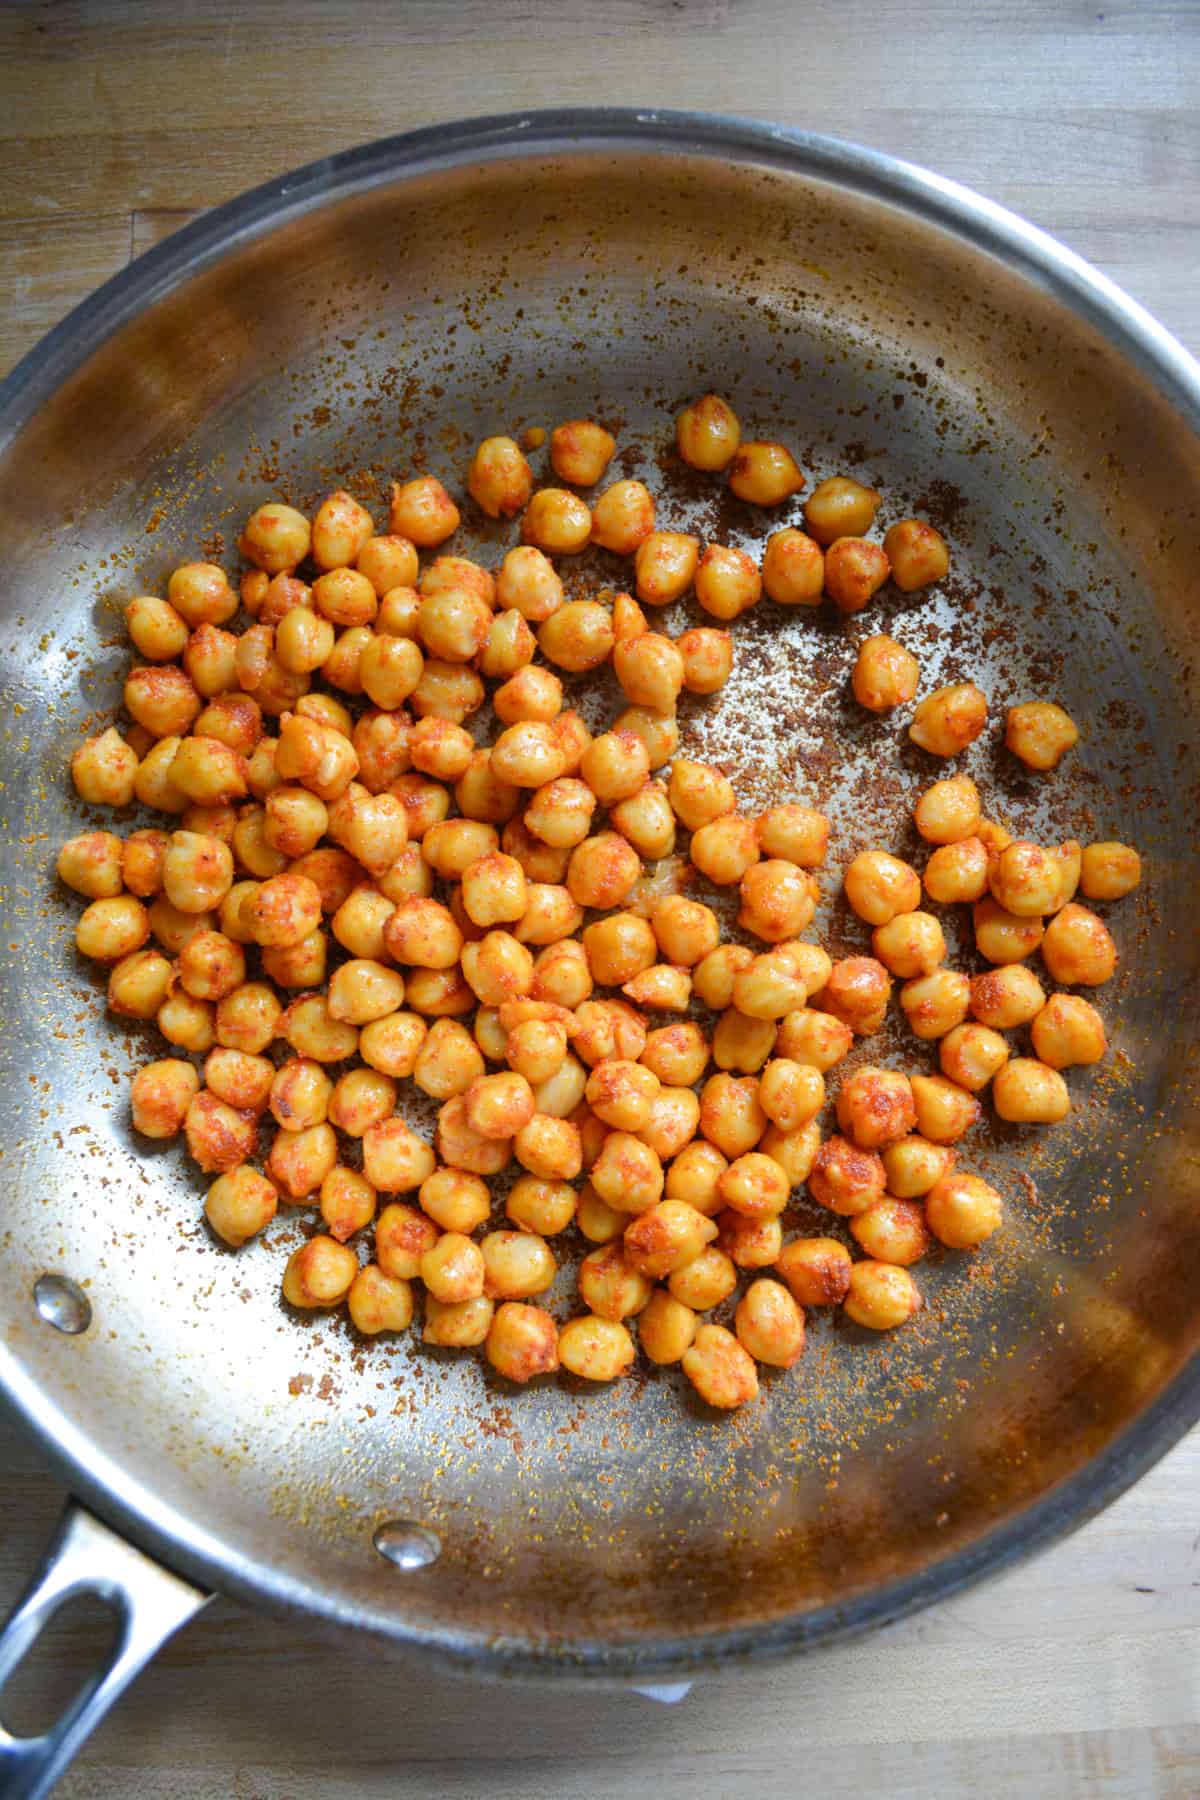 Chickpeas cooked with spices in a skillet.